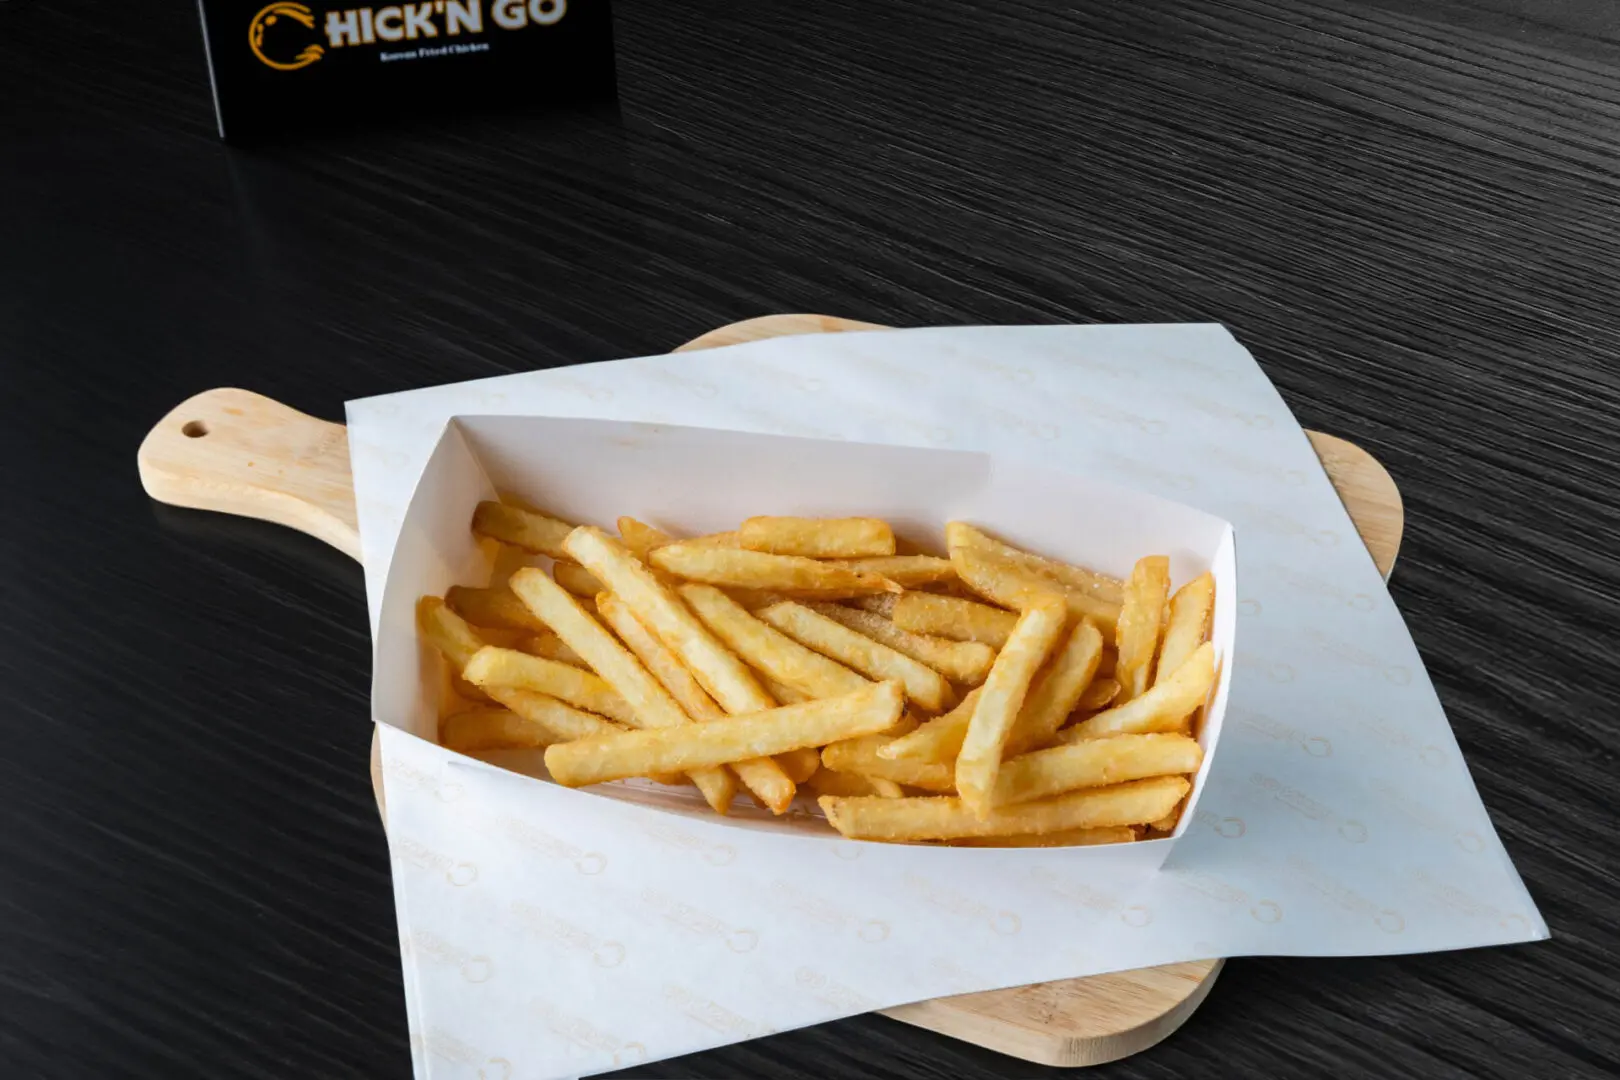 A box of fries on top of a wooden board.